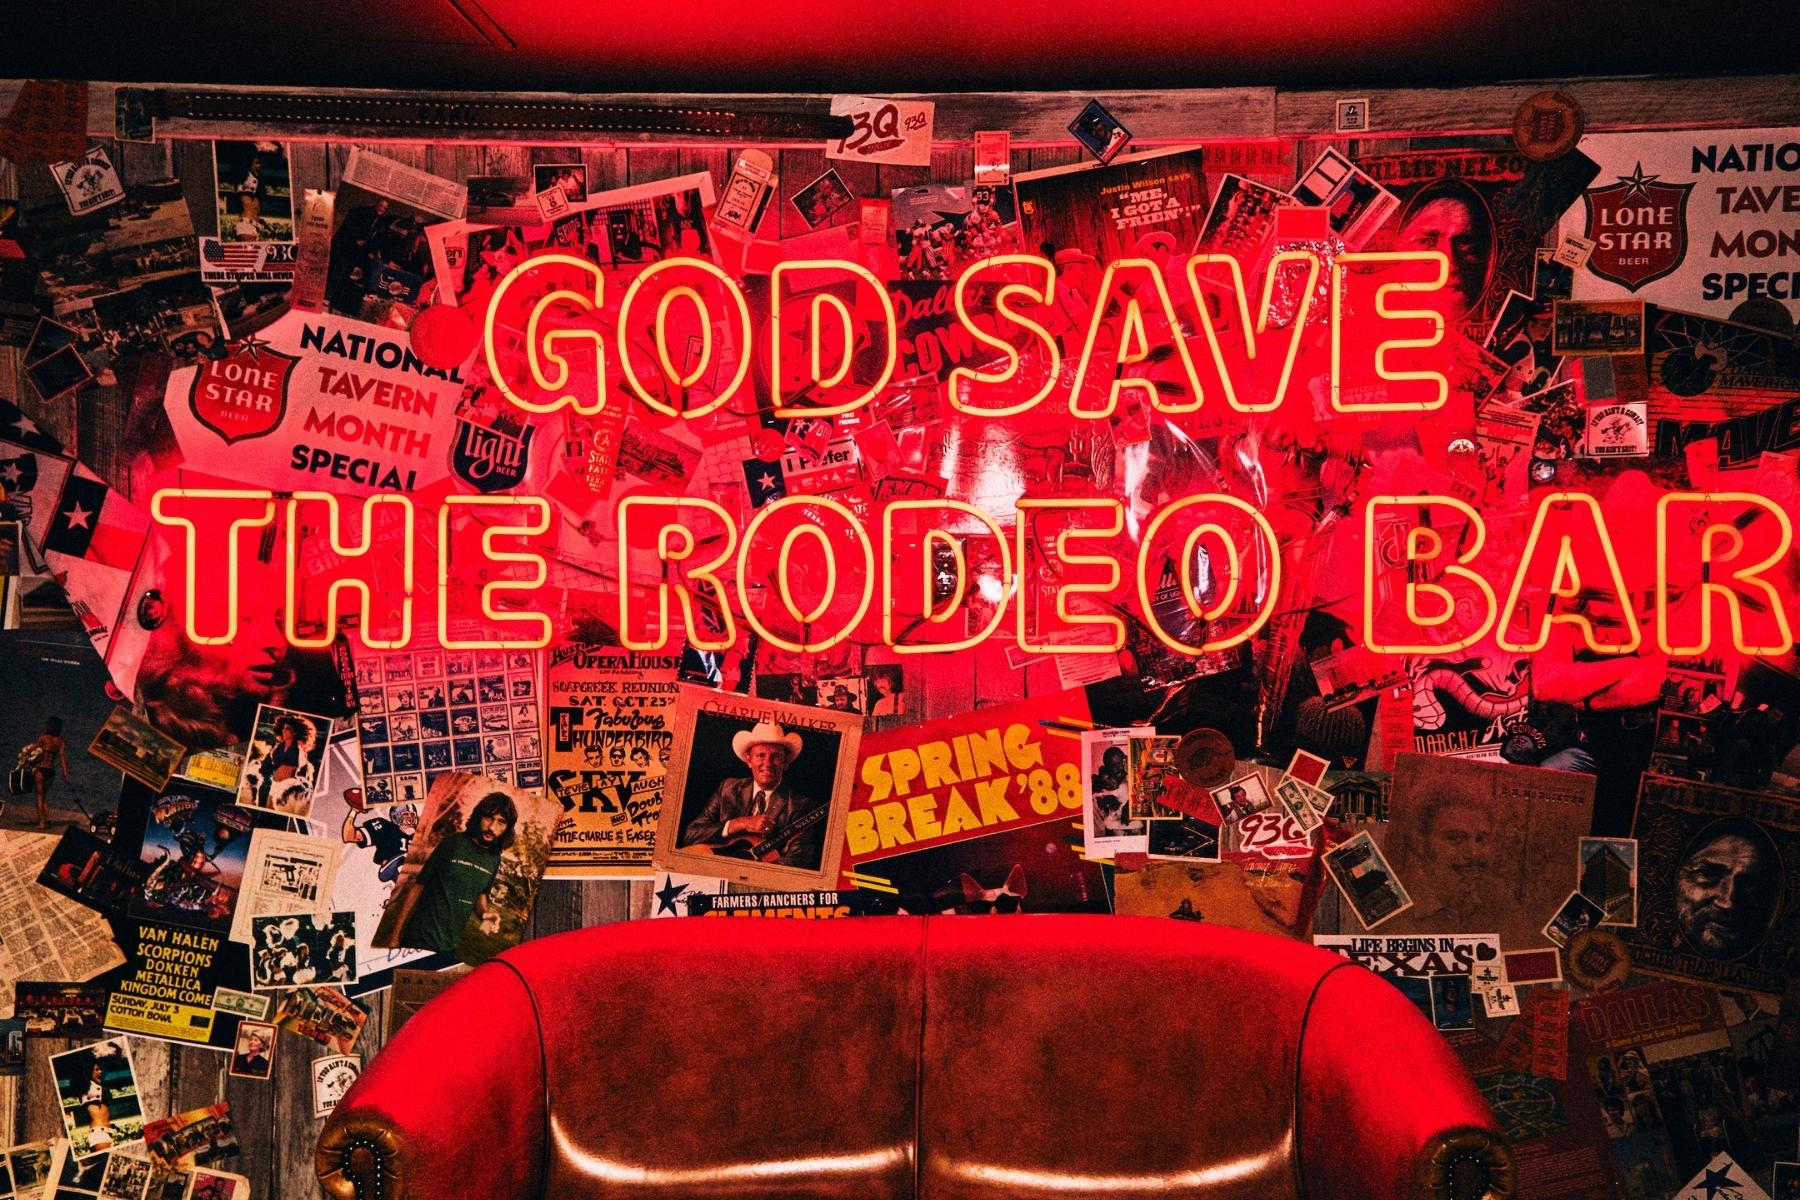 Neon Sign that says “God Save the Rodeo Bar”